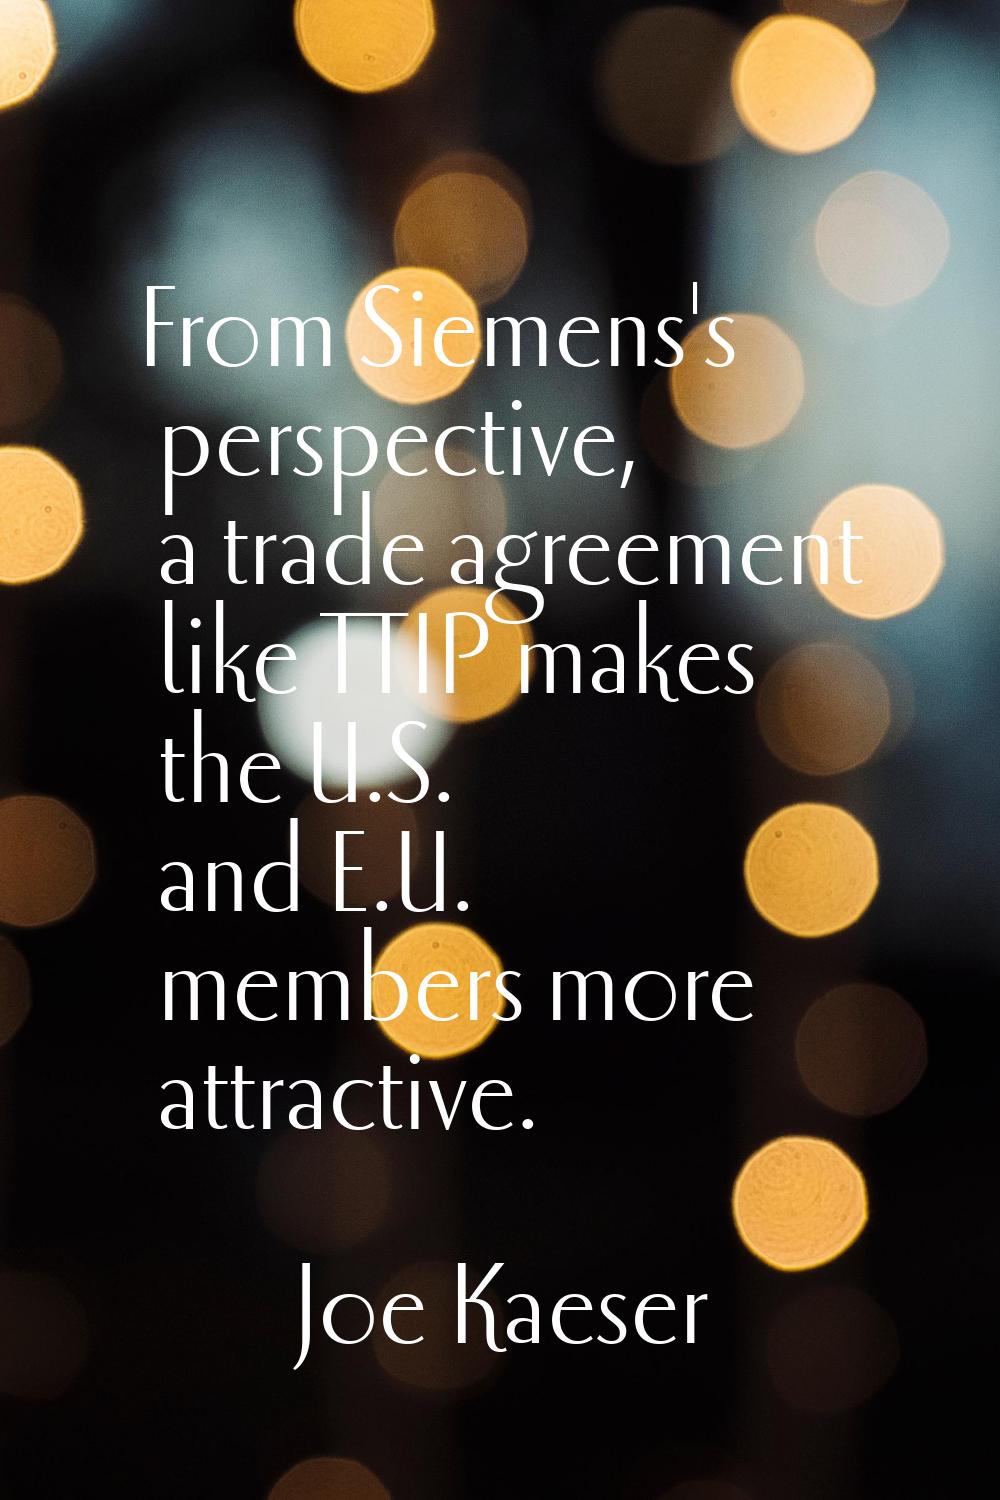 From Siemens's perspective, a trade agreement like TTIP makes the U.S. and E.U. members more attrac